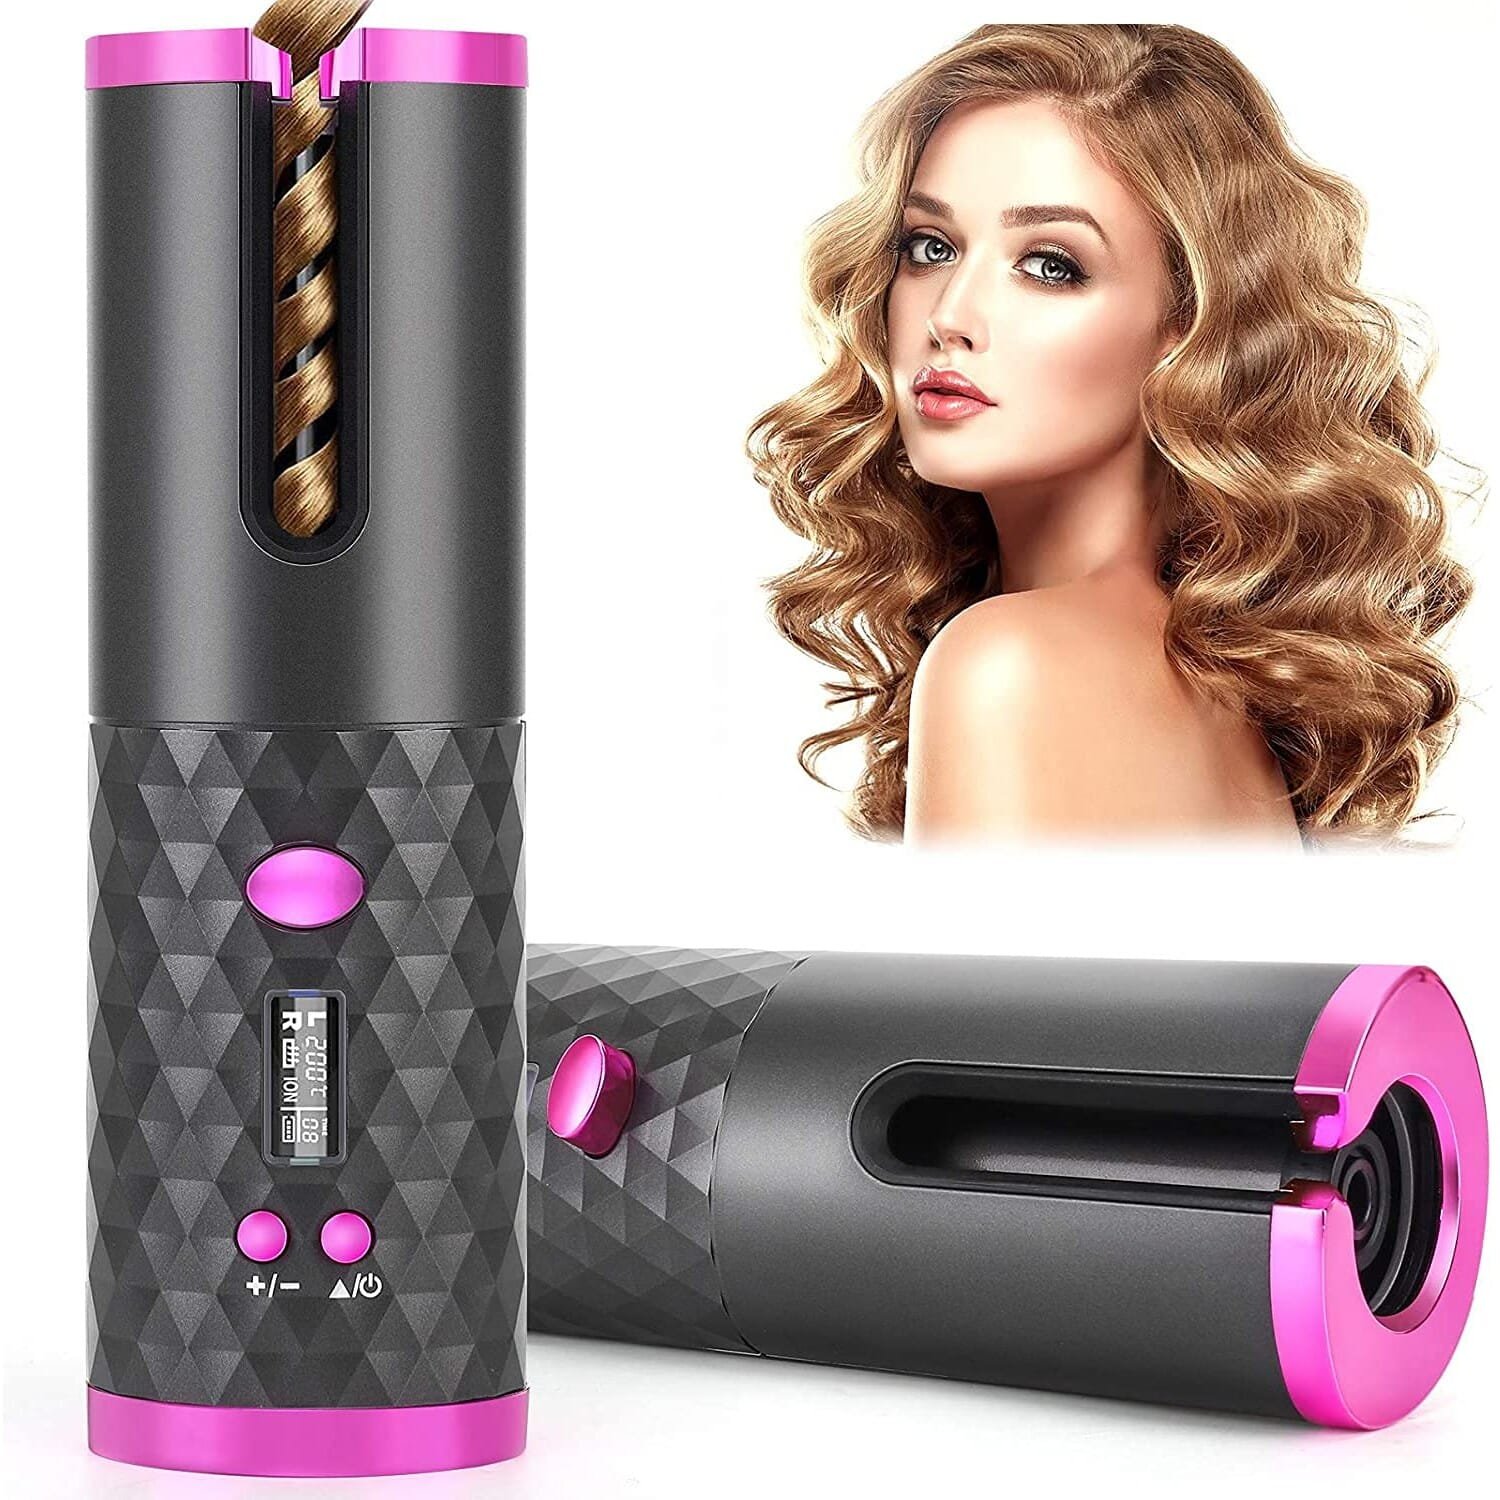 Cordless Auto Hair Curler With LCD Display